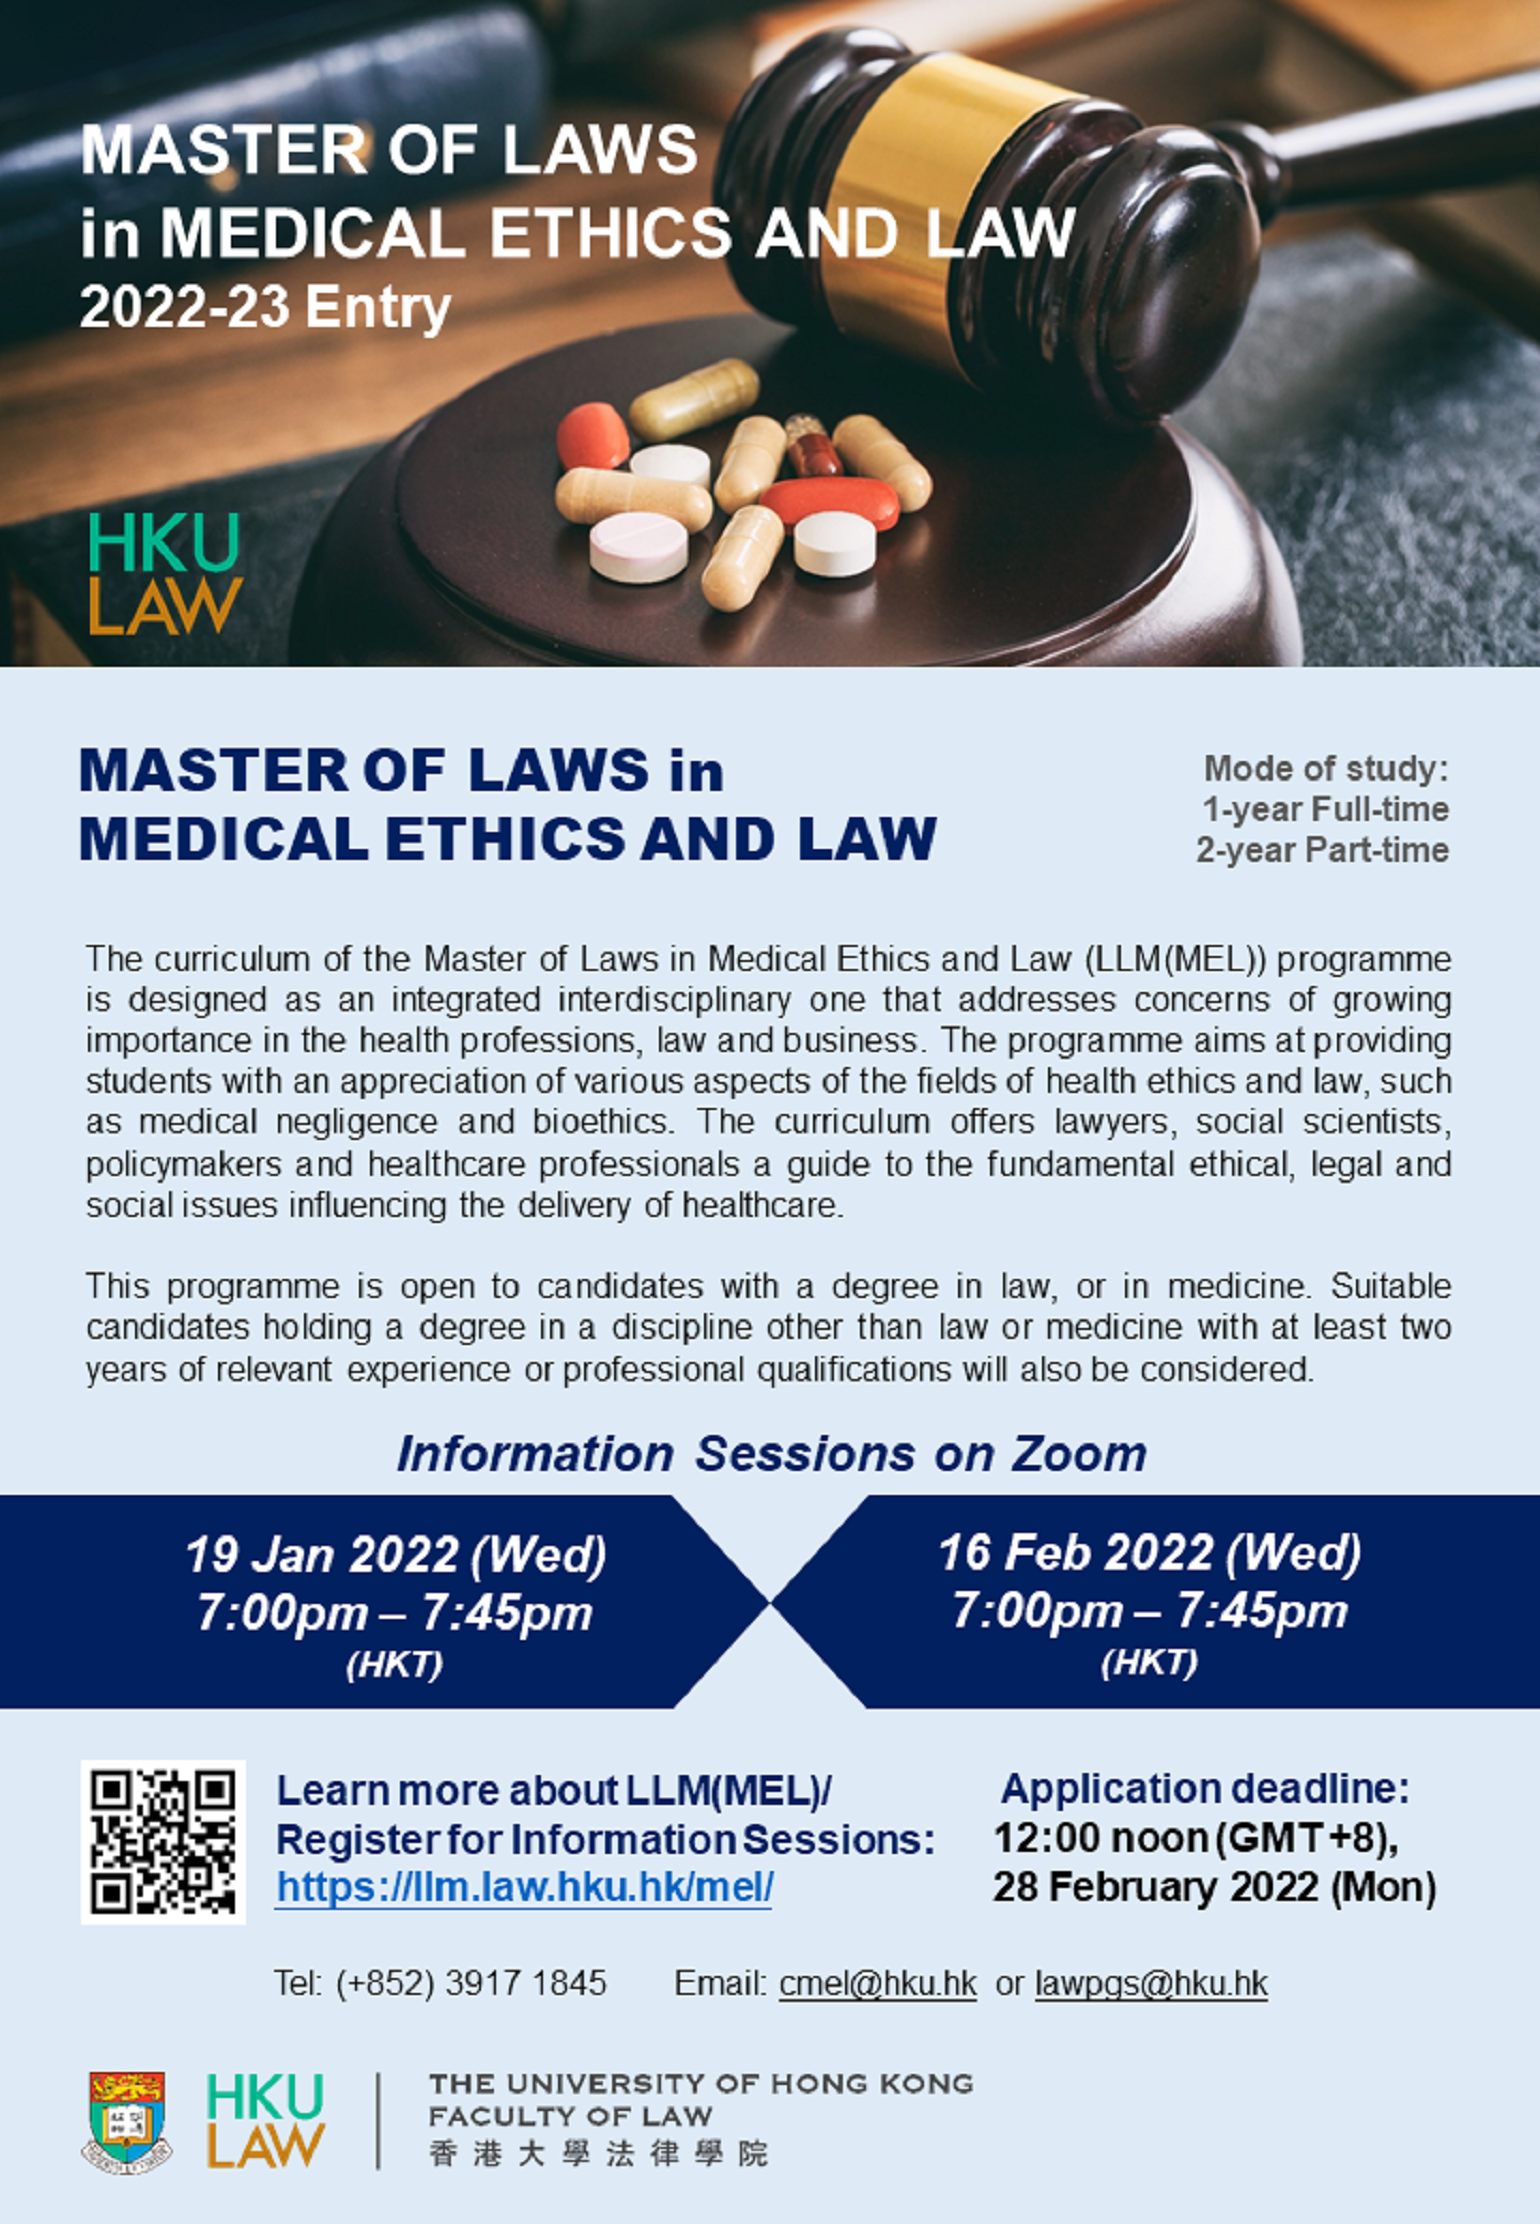 Master of Laws in Medical Ethics and Law Info Session